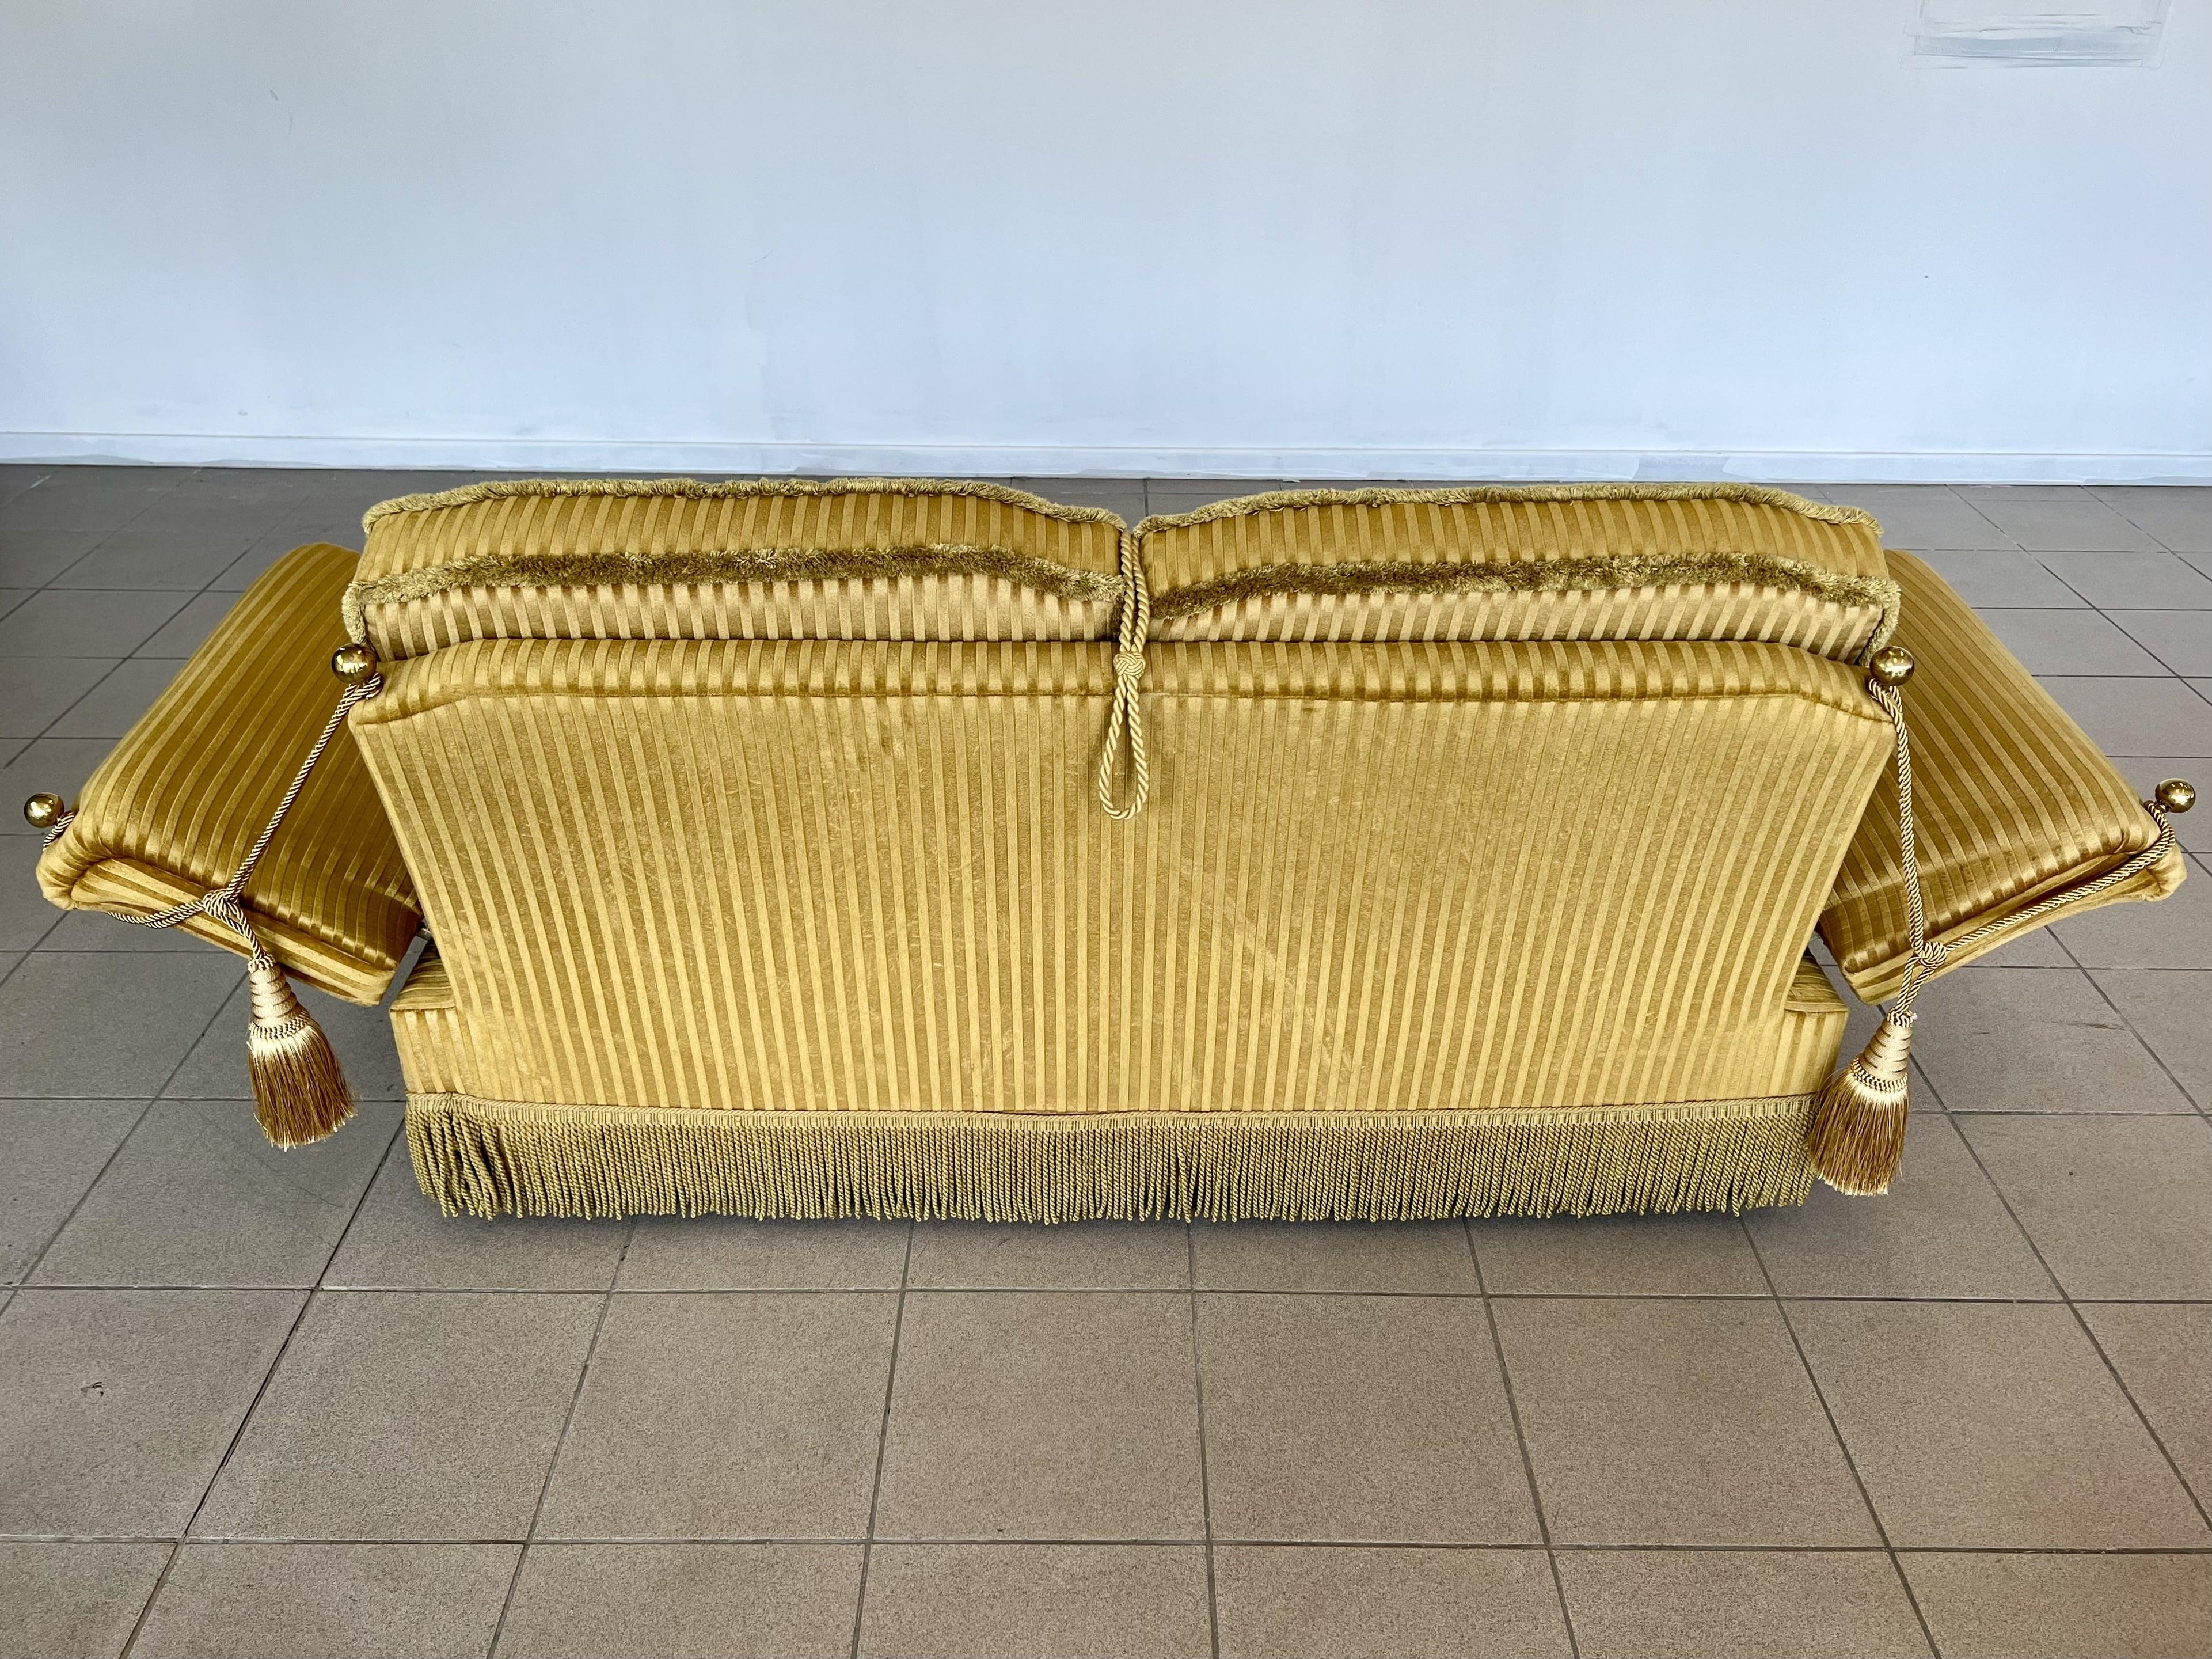 Vintage Art Deco Styled Adjustable Sofa Bed With Cushions and Fringes im Angebot 6